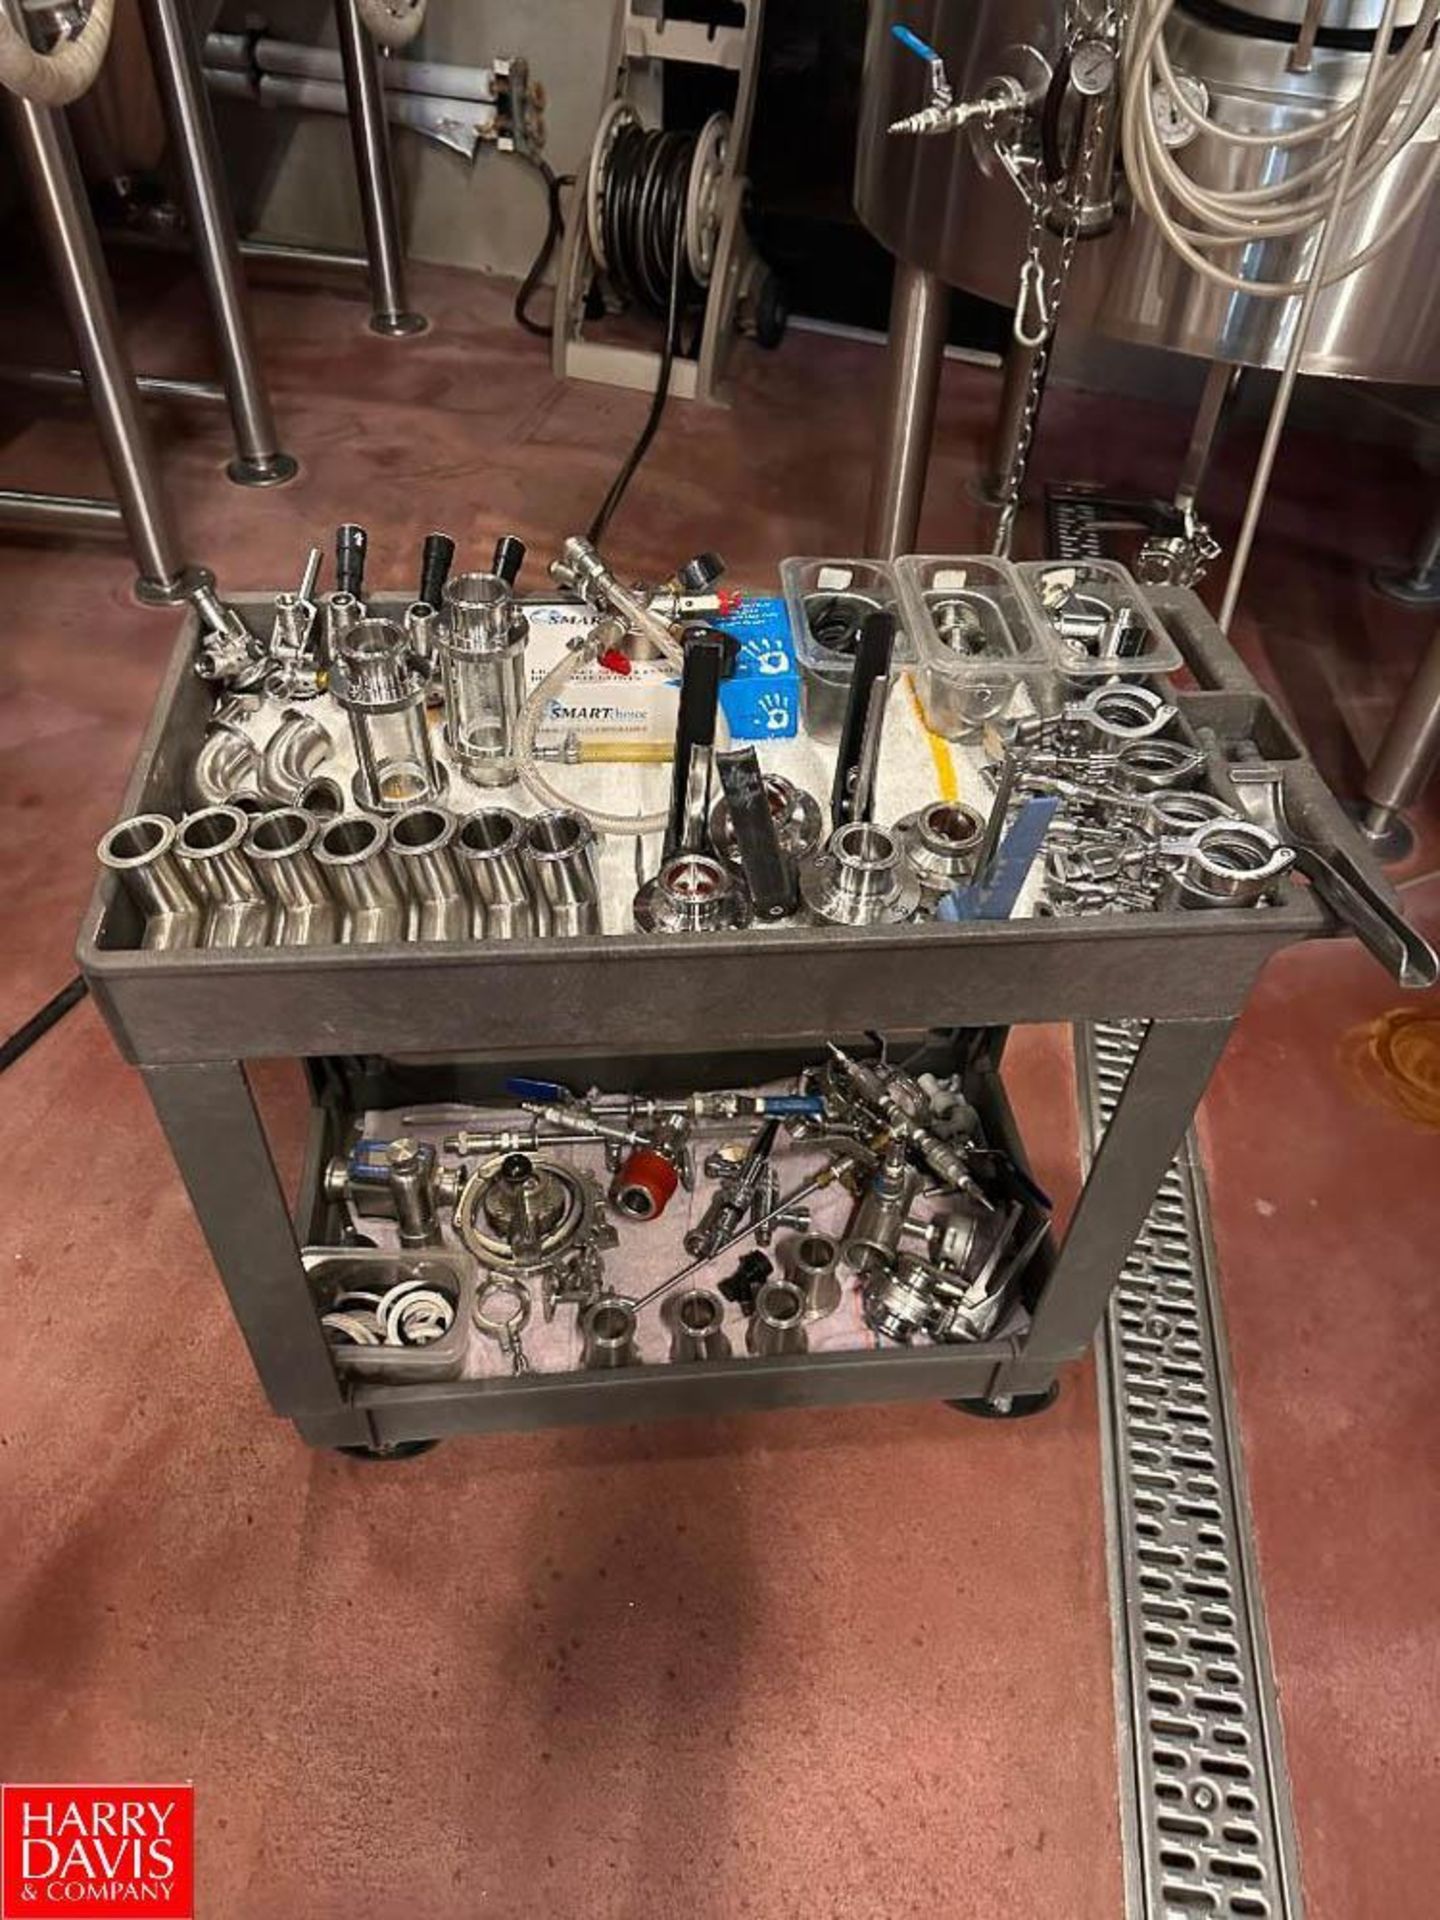 Rubbermaid Cart with Fittings, Filters, Clamps, Flow Meter and Valves - Rigging Fee: $200